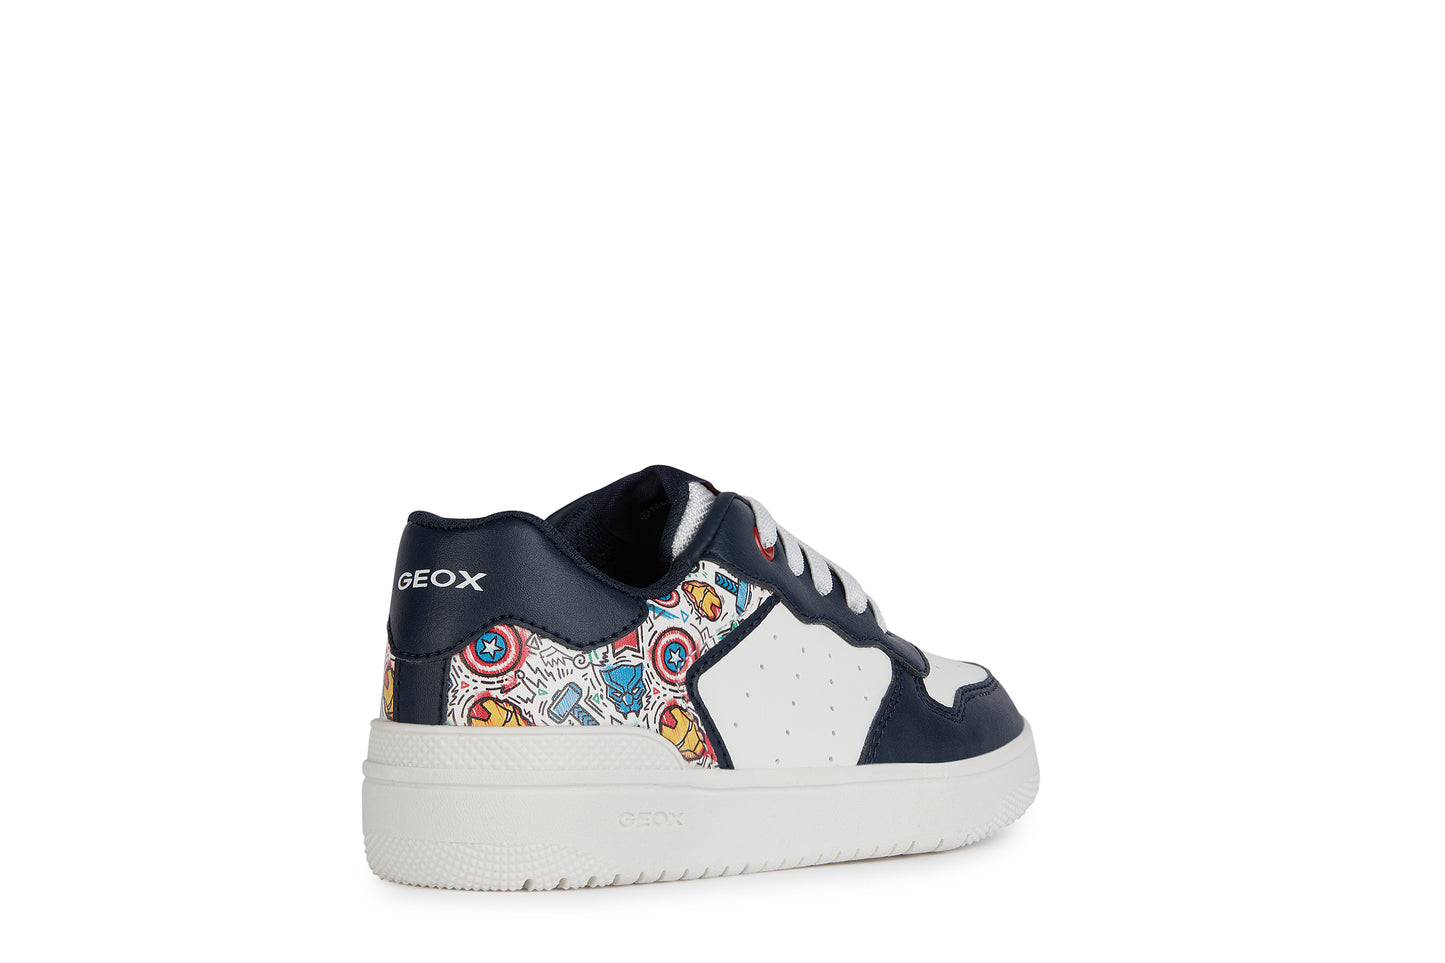 A boys casual trainer by Geox, style J Washiba, in navy and white with avengers print. Lace fastening. Angled view of right side.